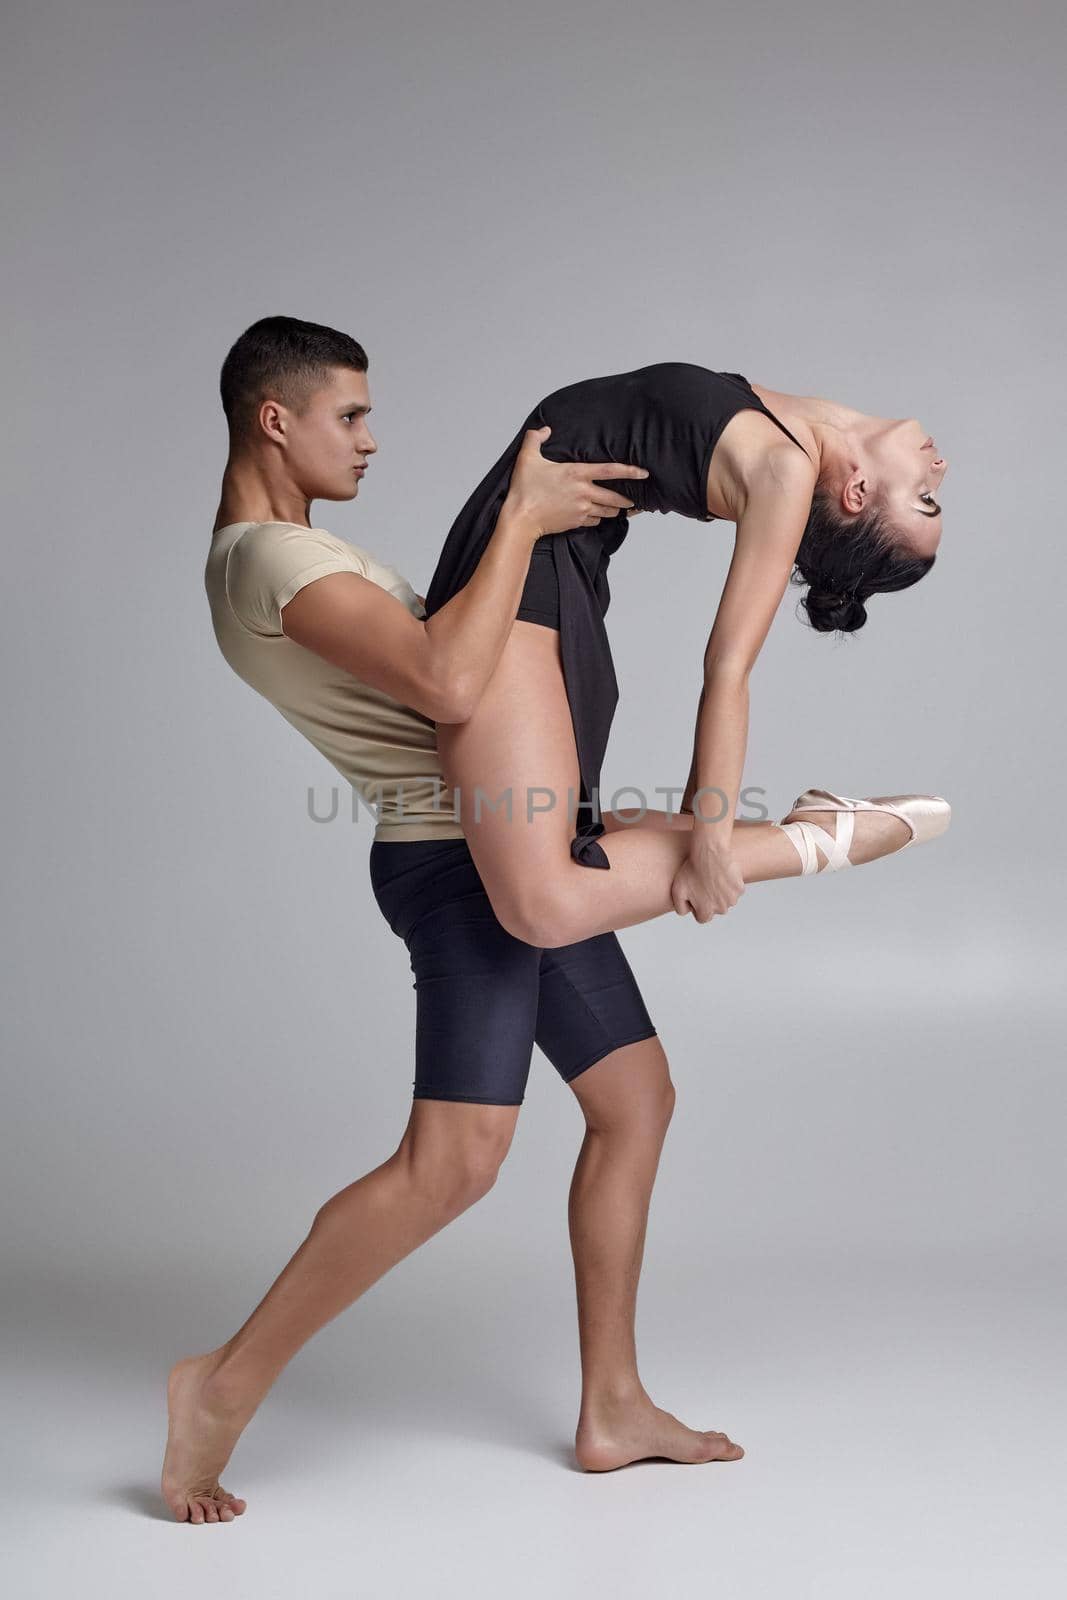 Pair of an adorable graceful ballet dancers are posing over a gray studio background. Handsome man in black shorts with beige t-shirt is holding a gorgeous woman in a black dress and white pointe shoes in his strong hands. Ballet and contemporary choreography concept. Art photo.